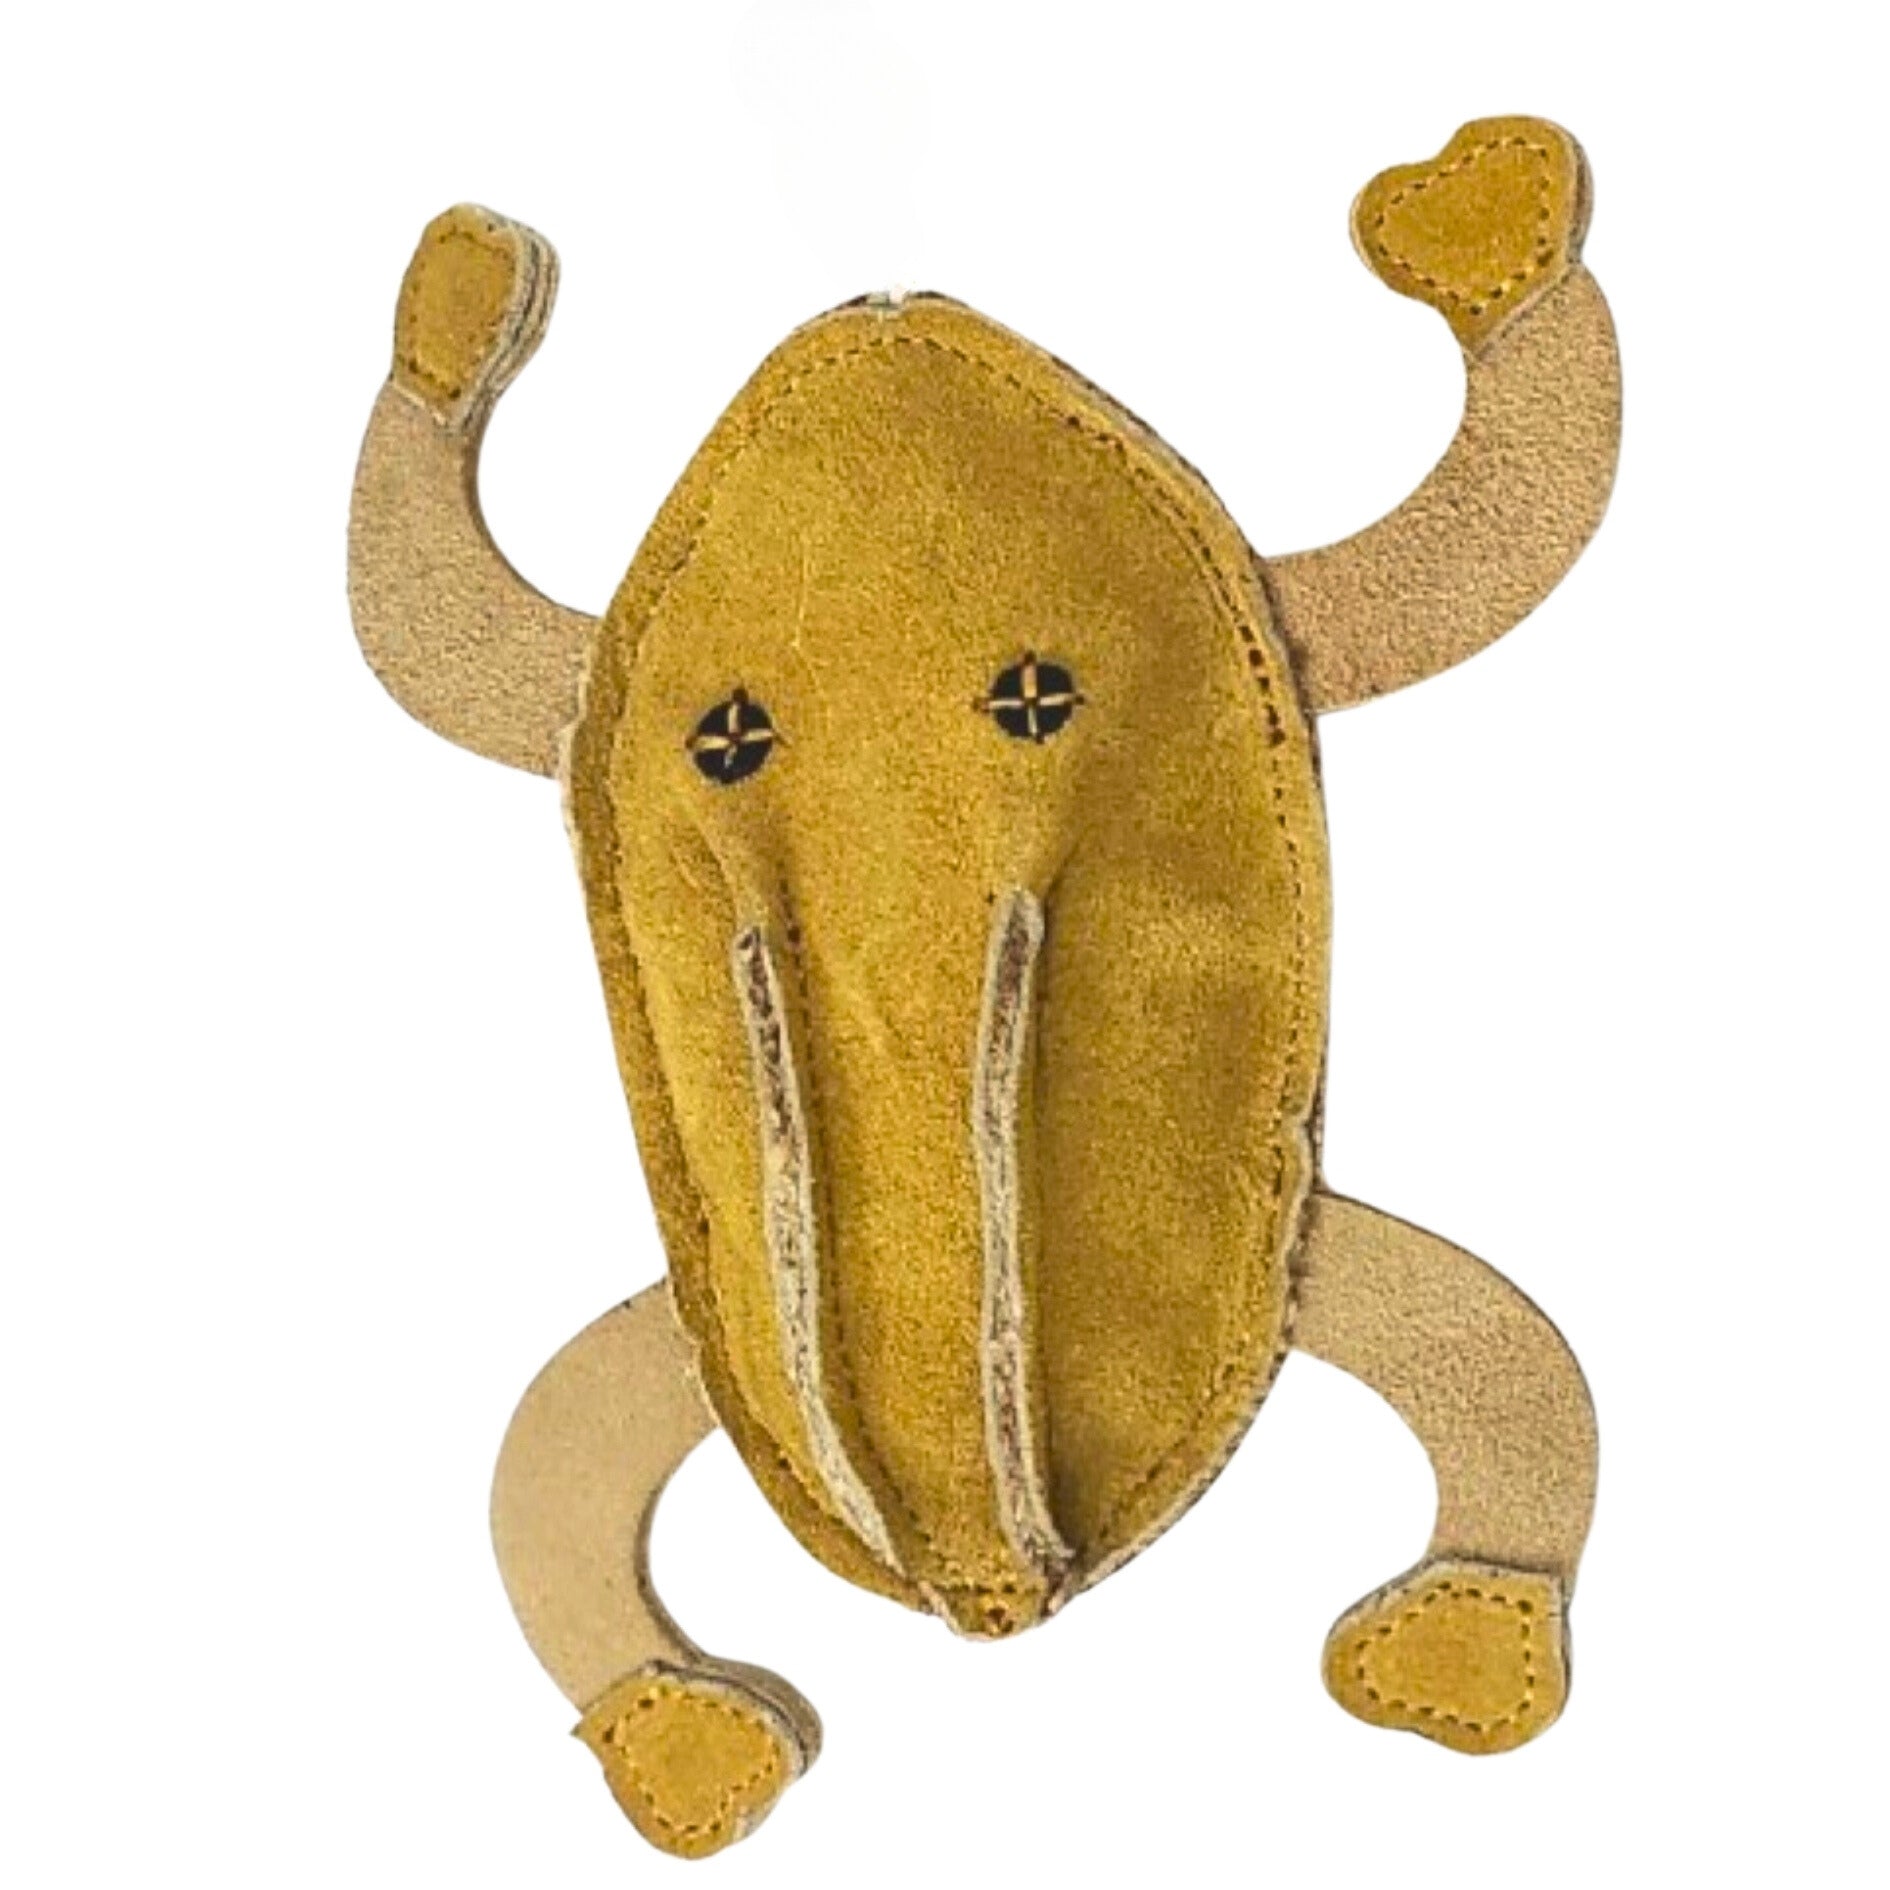 A compostable dog toy: Frank the Frog - Gold, by Georgie Paws.